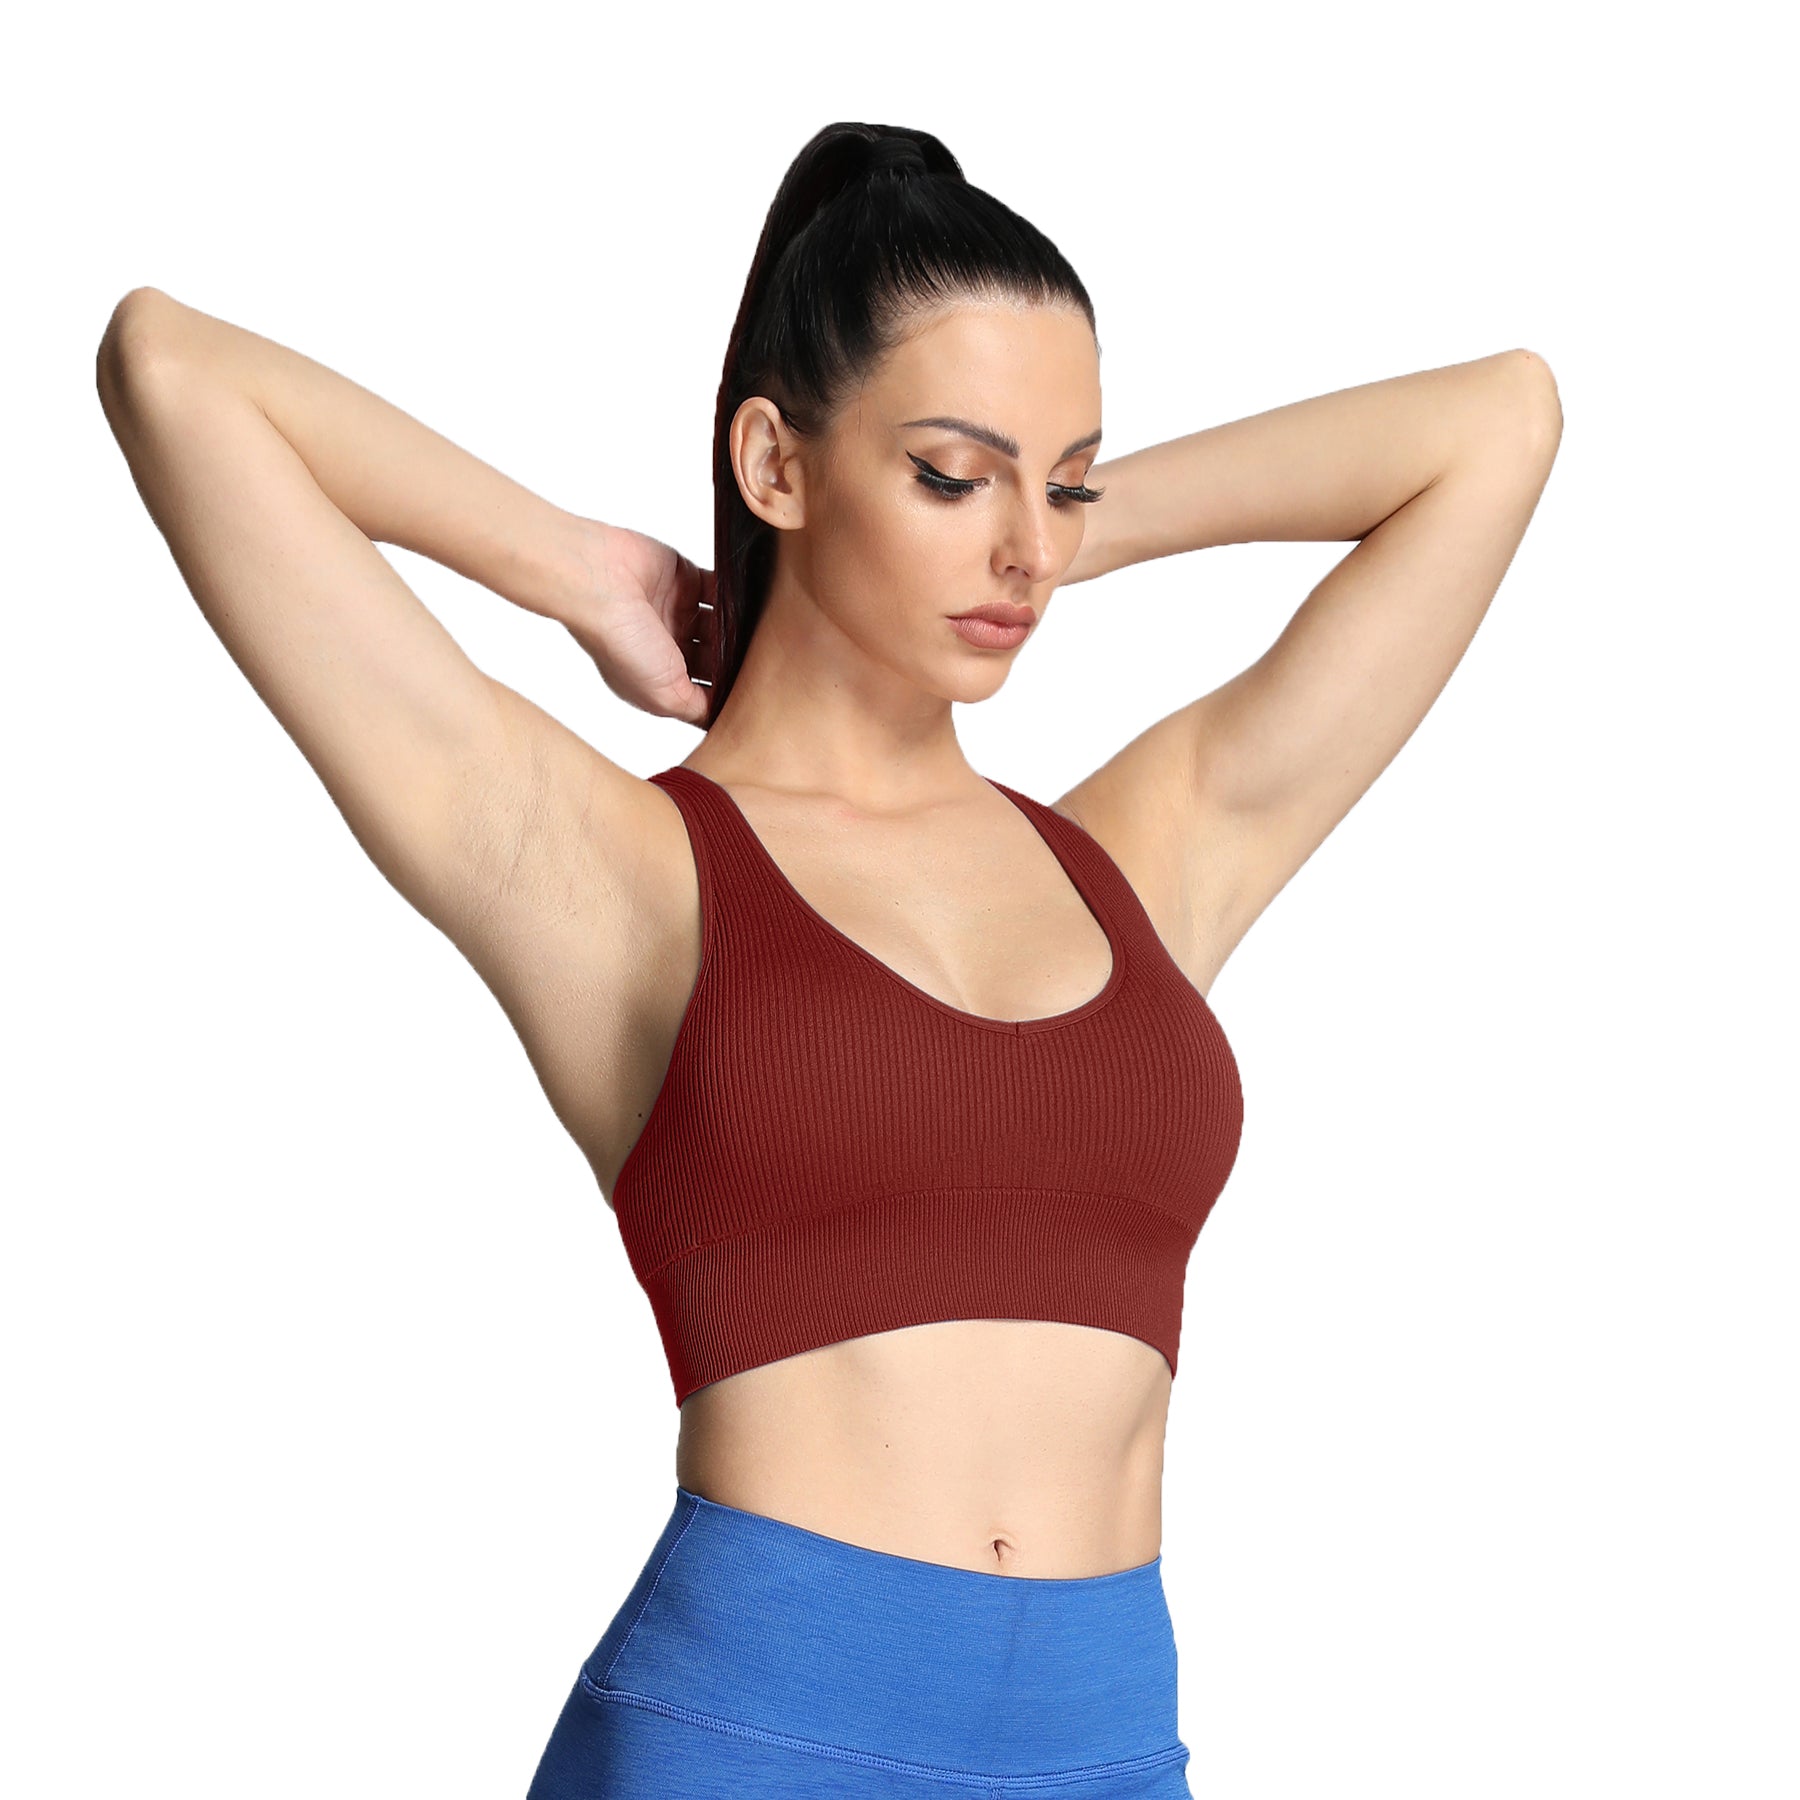 Red Ribbed Seamless Crop Top Bra